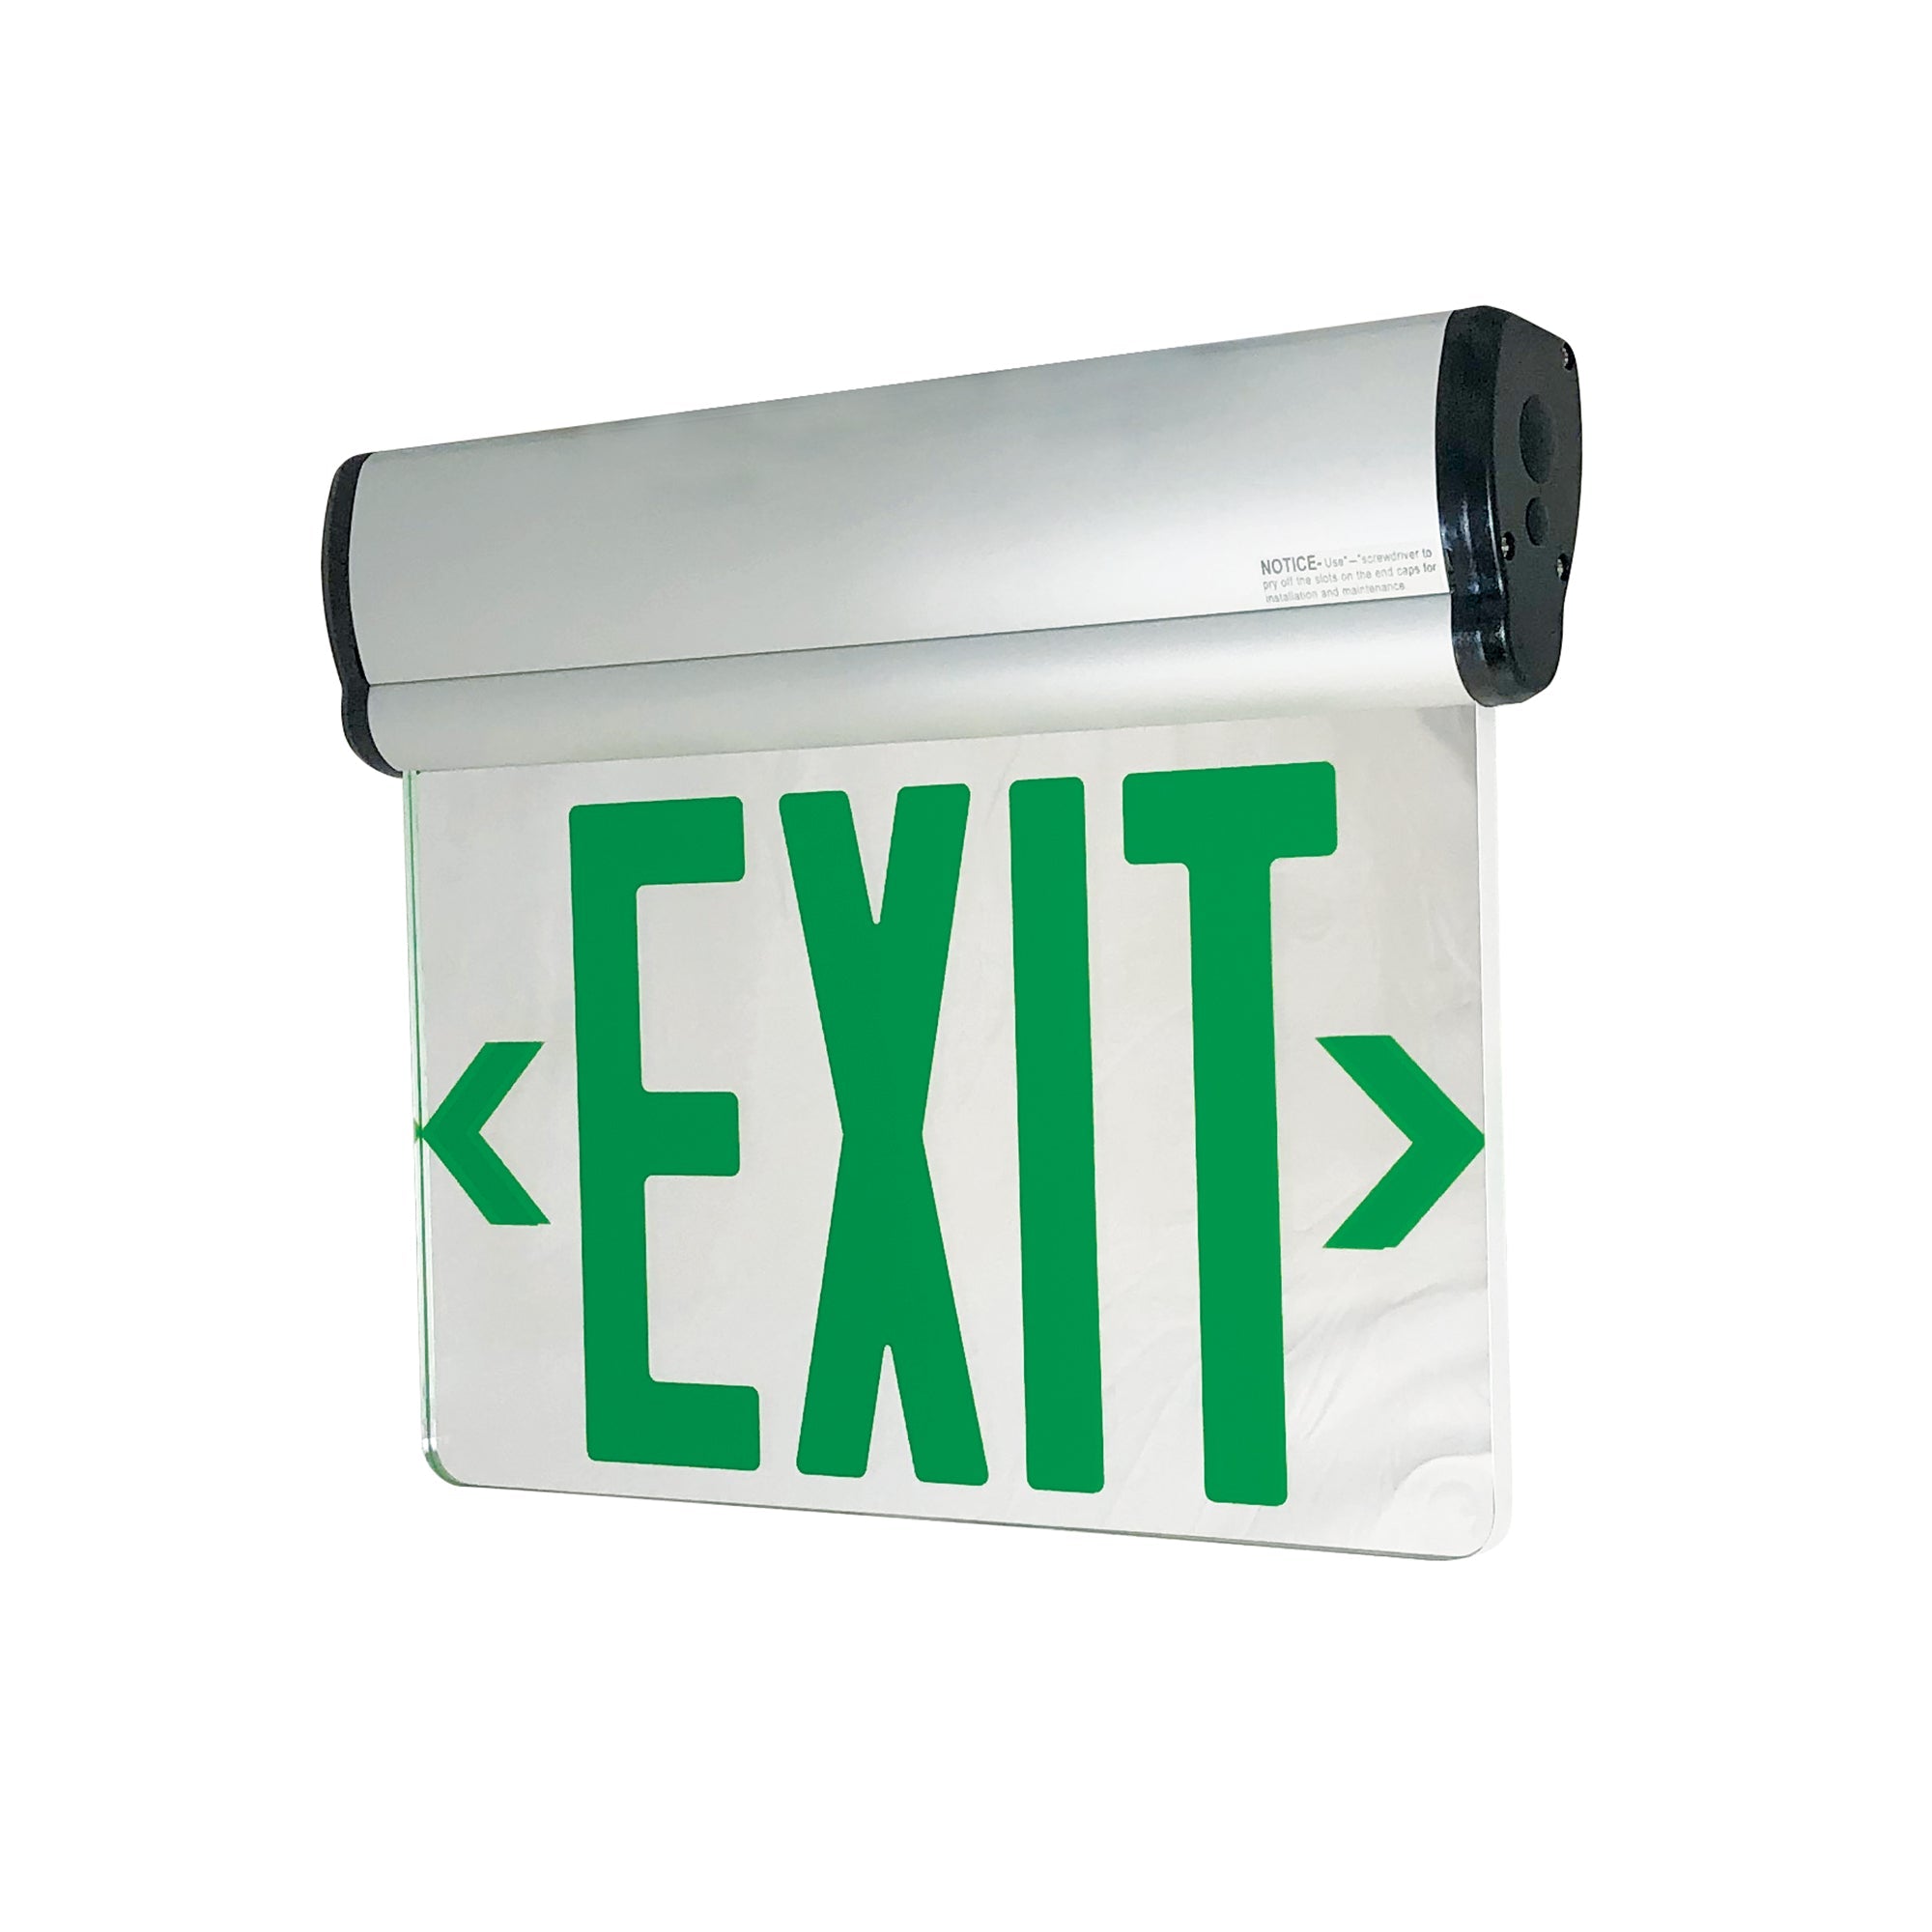 Nora Lighting NX-812-LEDGMA - Exit / Emergency - Surface Adjustable LED Edge-Lit Exit Sign, Battery Backup, 6 Inch Green Letters, Single Face / Mirrored Acrylic, Aluminum Housing